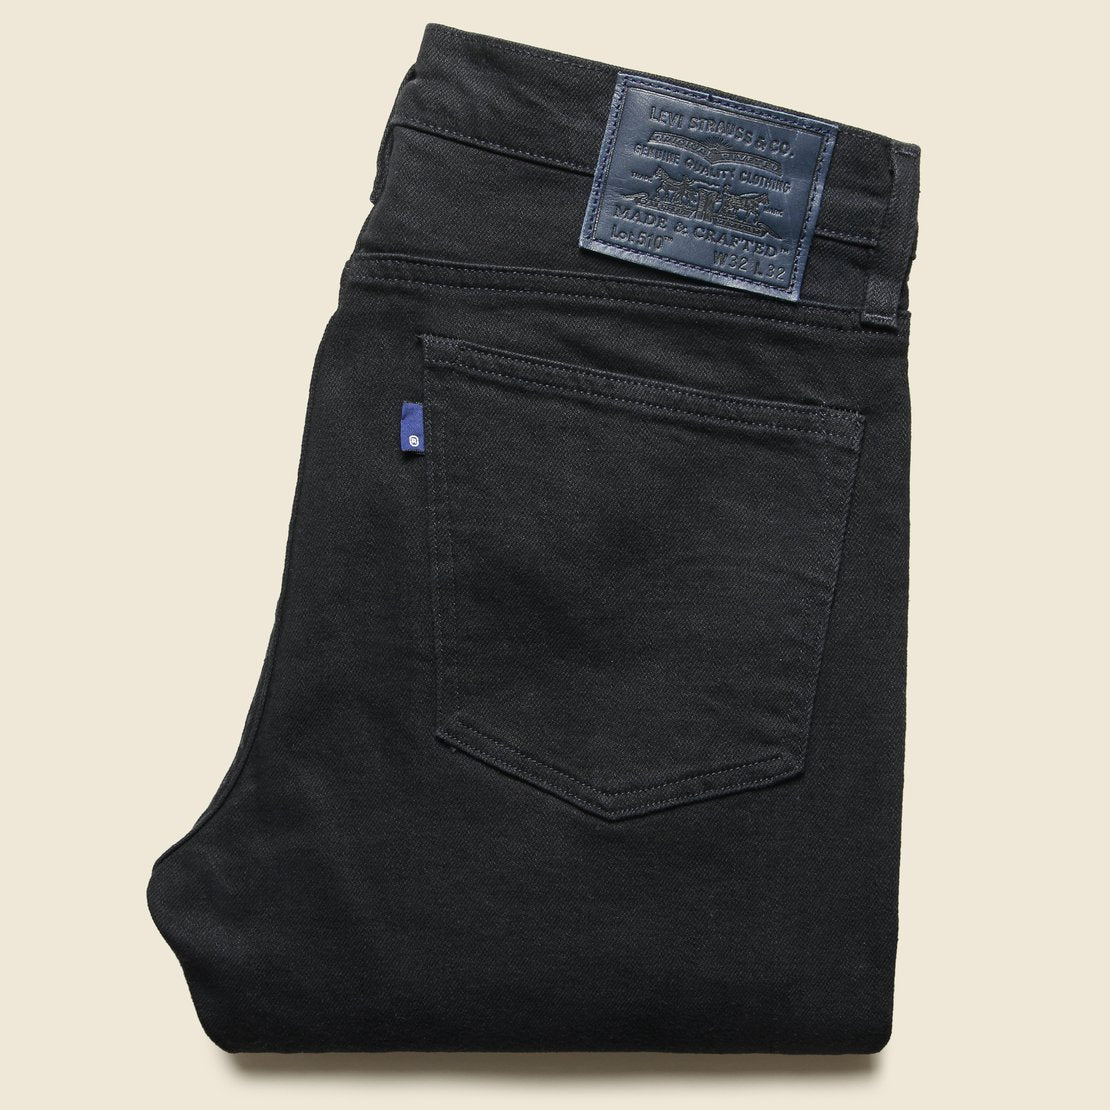 510 Skinny Jean - Black Rinse - Levis Made & Crafted - STAG Provisions - Pants - Denim